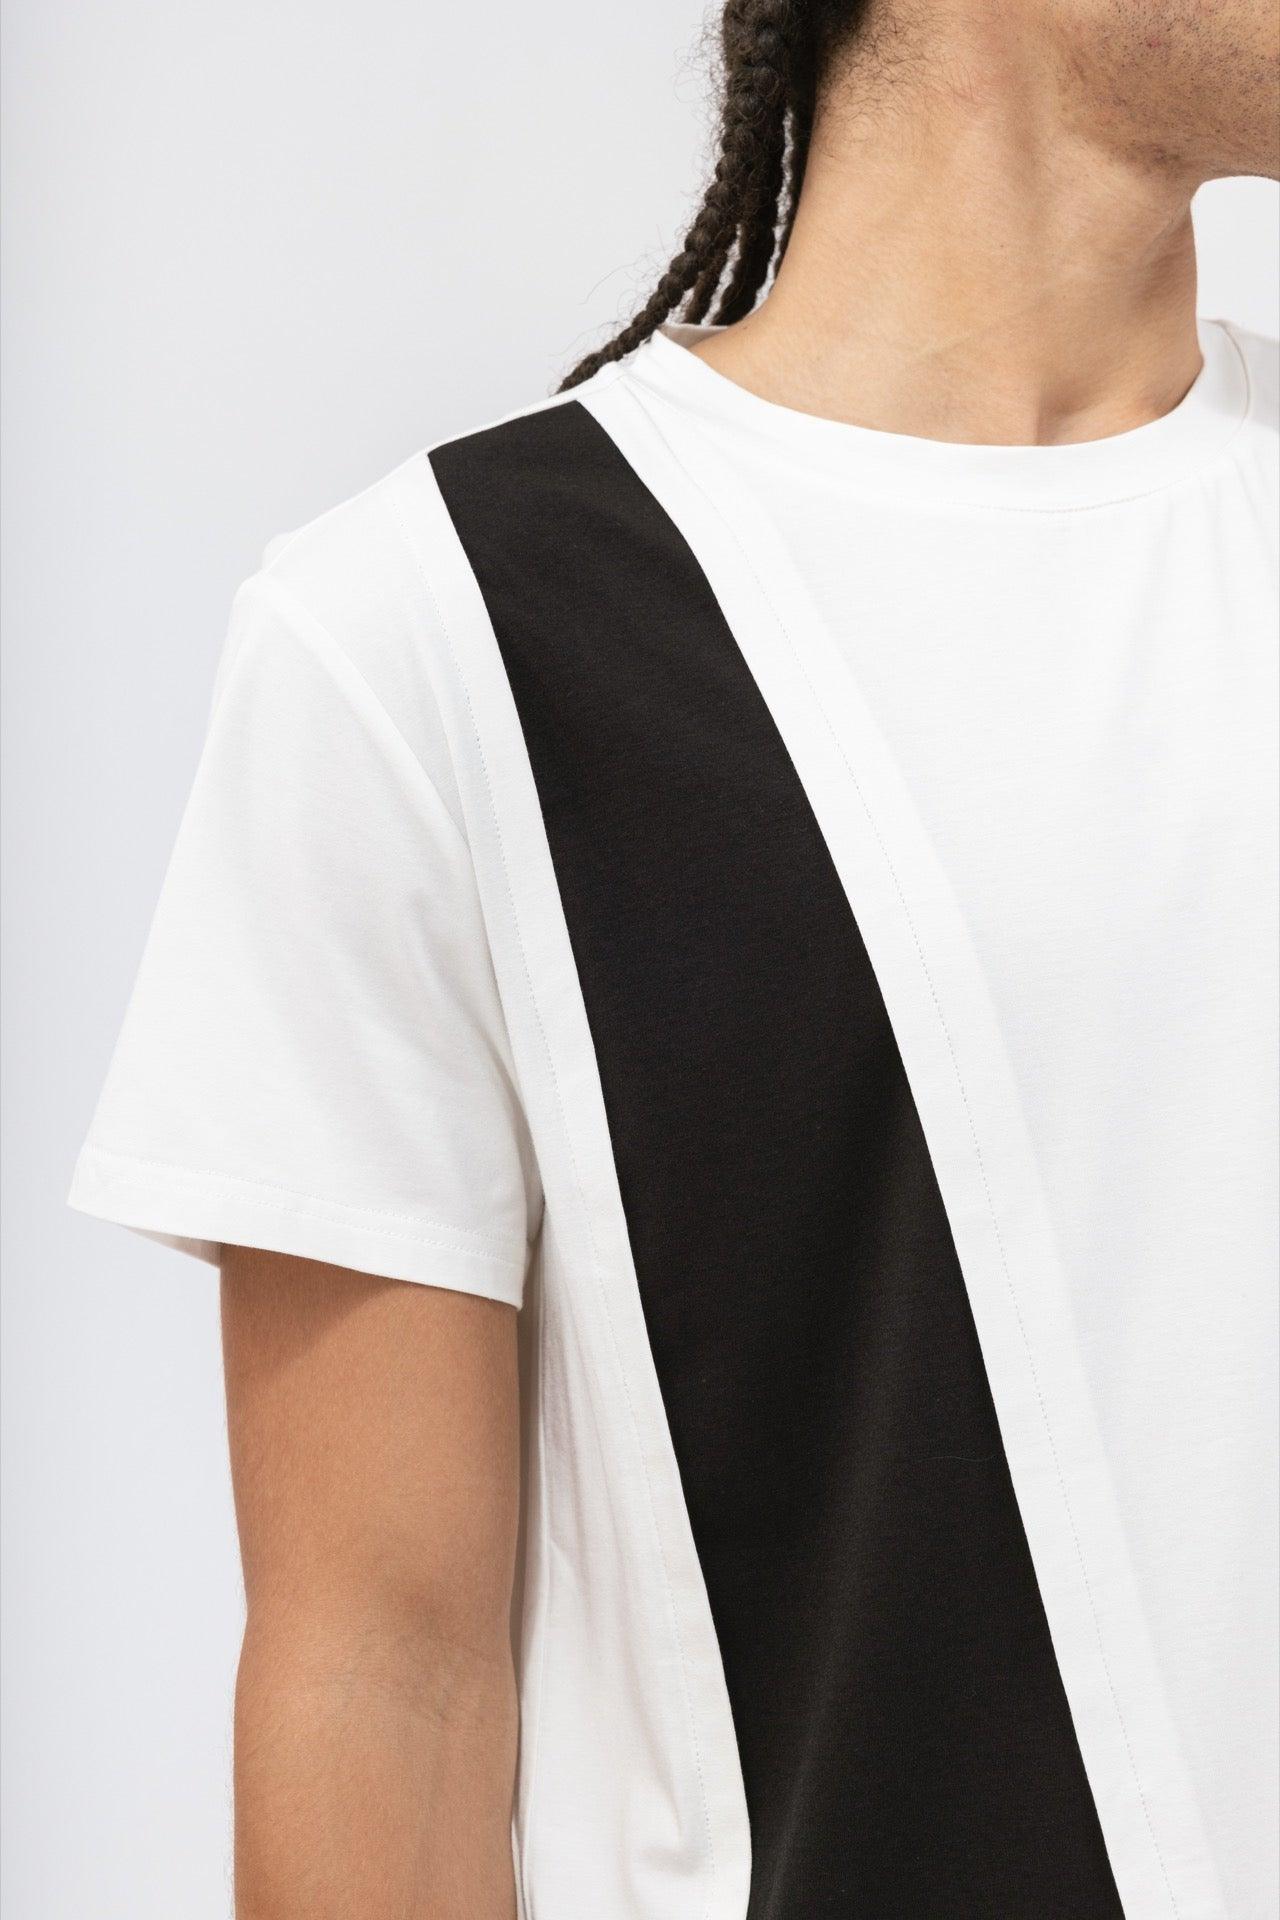 Men&#39;s Color Block Tee - NOT LABELED